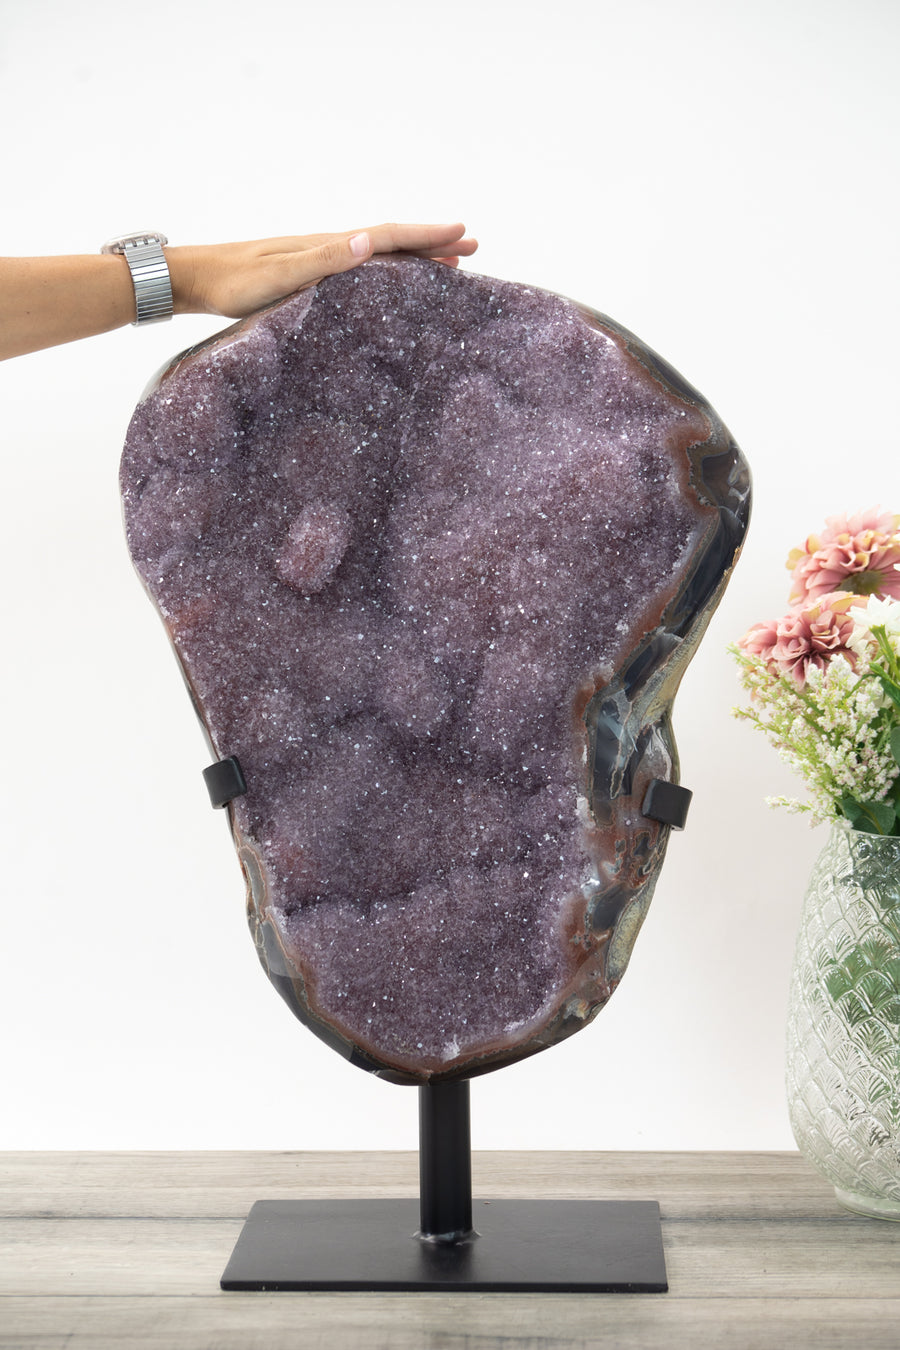 XXL Natura Lavander Amethyst Cluster with Stunning Agate Shell - AWS1444